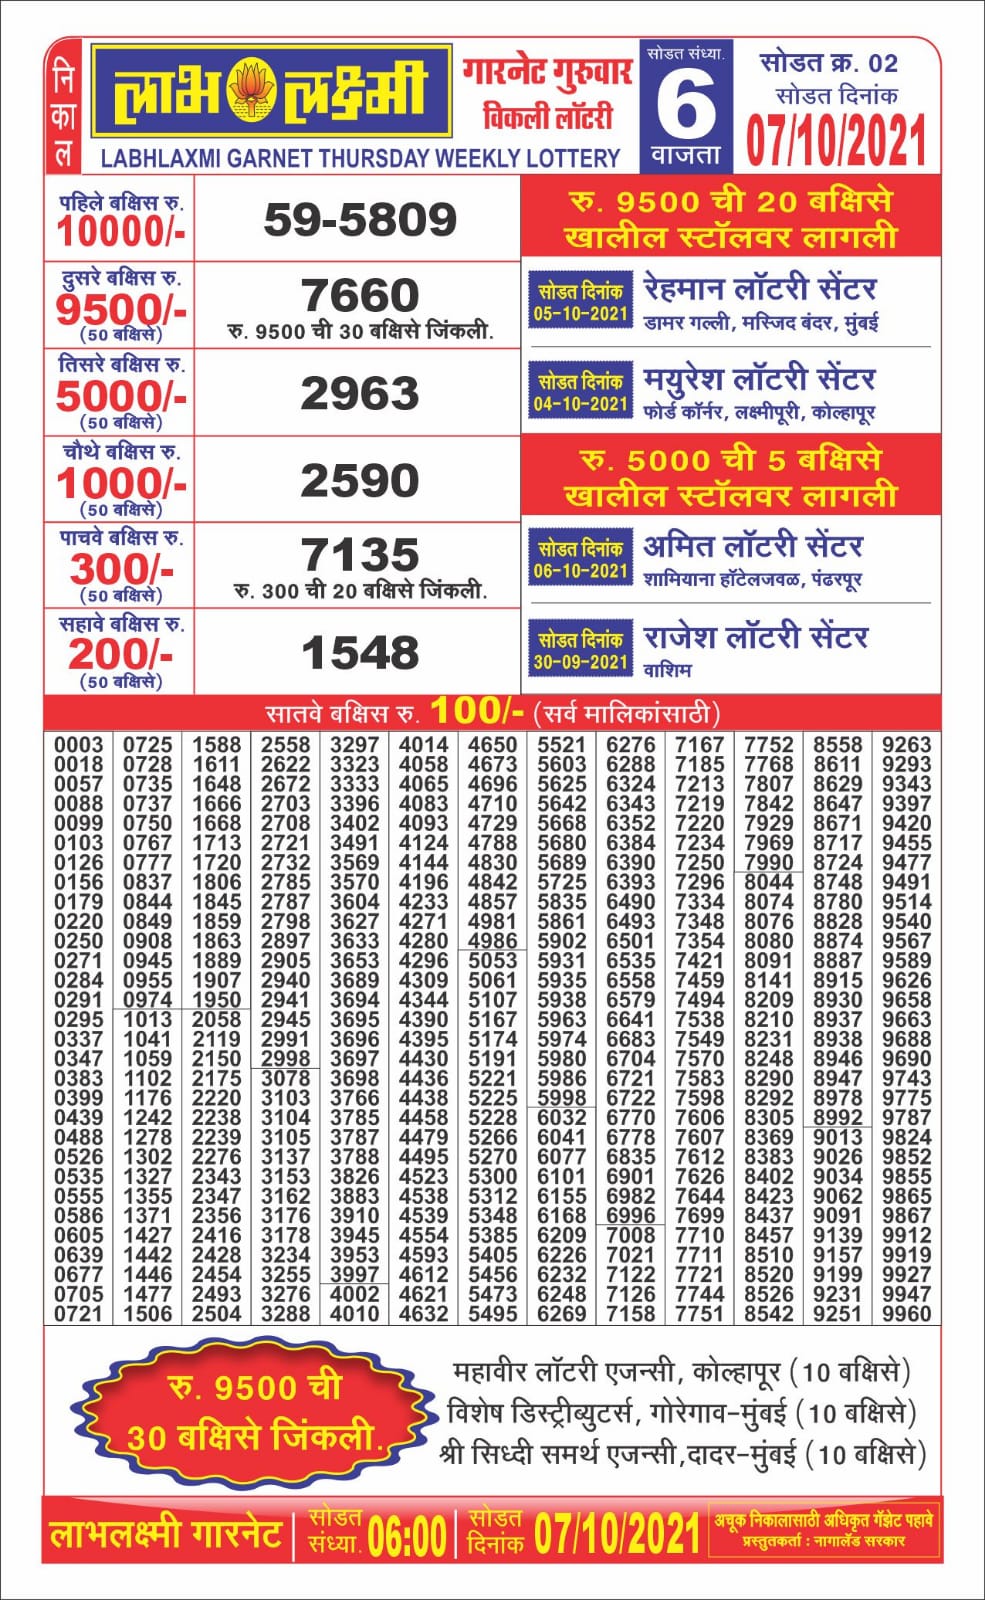 Labhlaxmi 6pm Lottery Result 07-10-2021